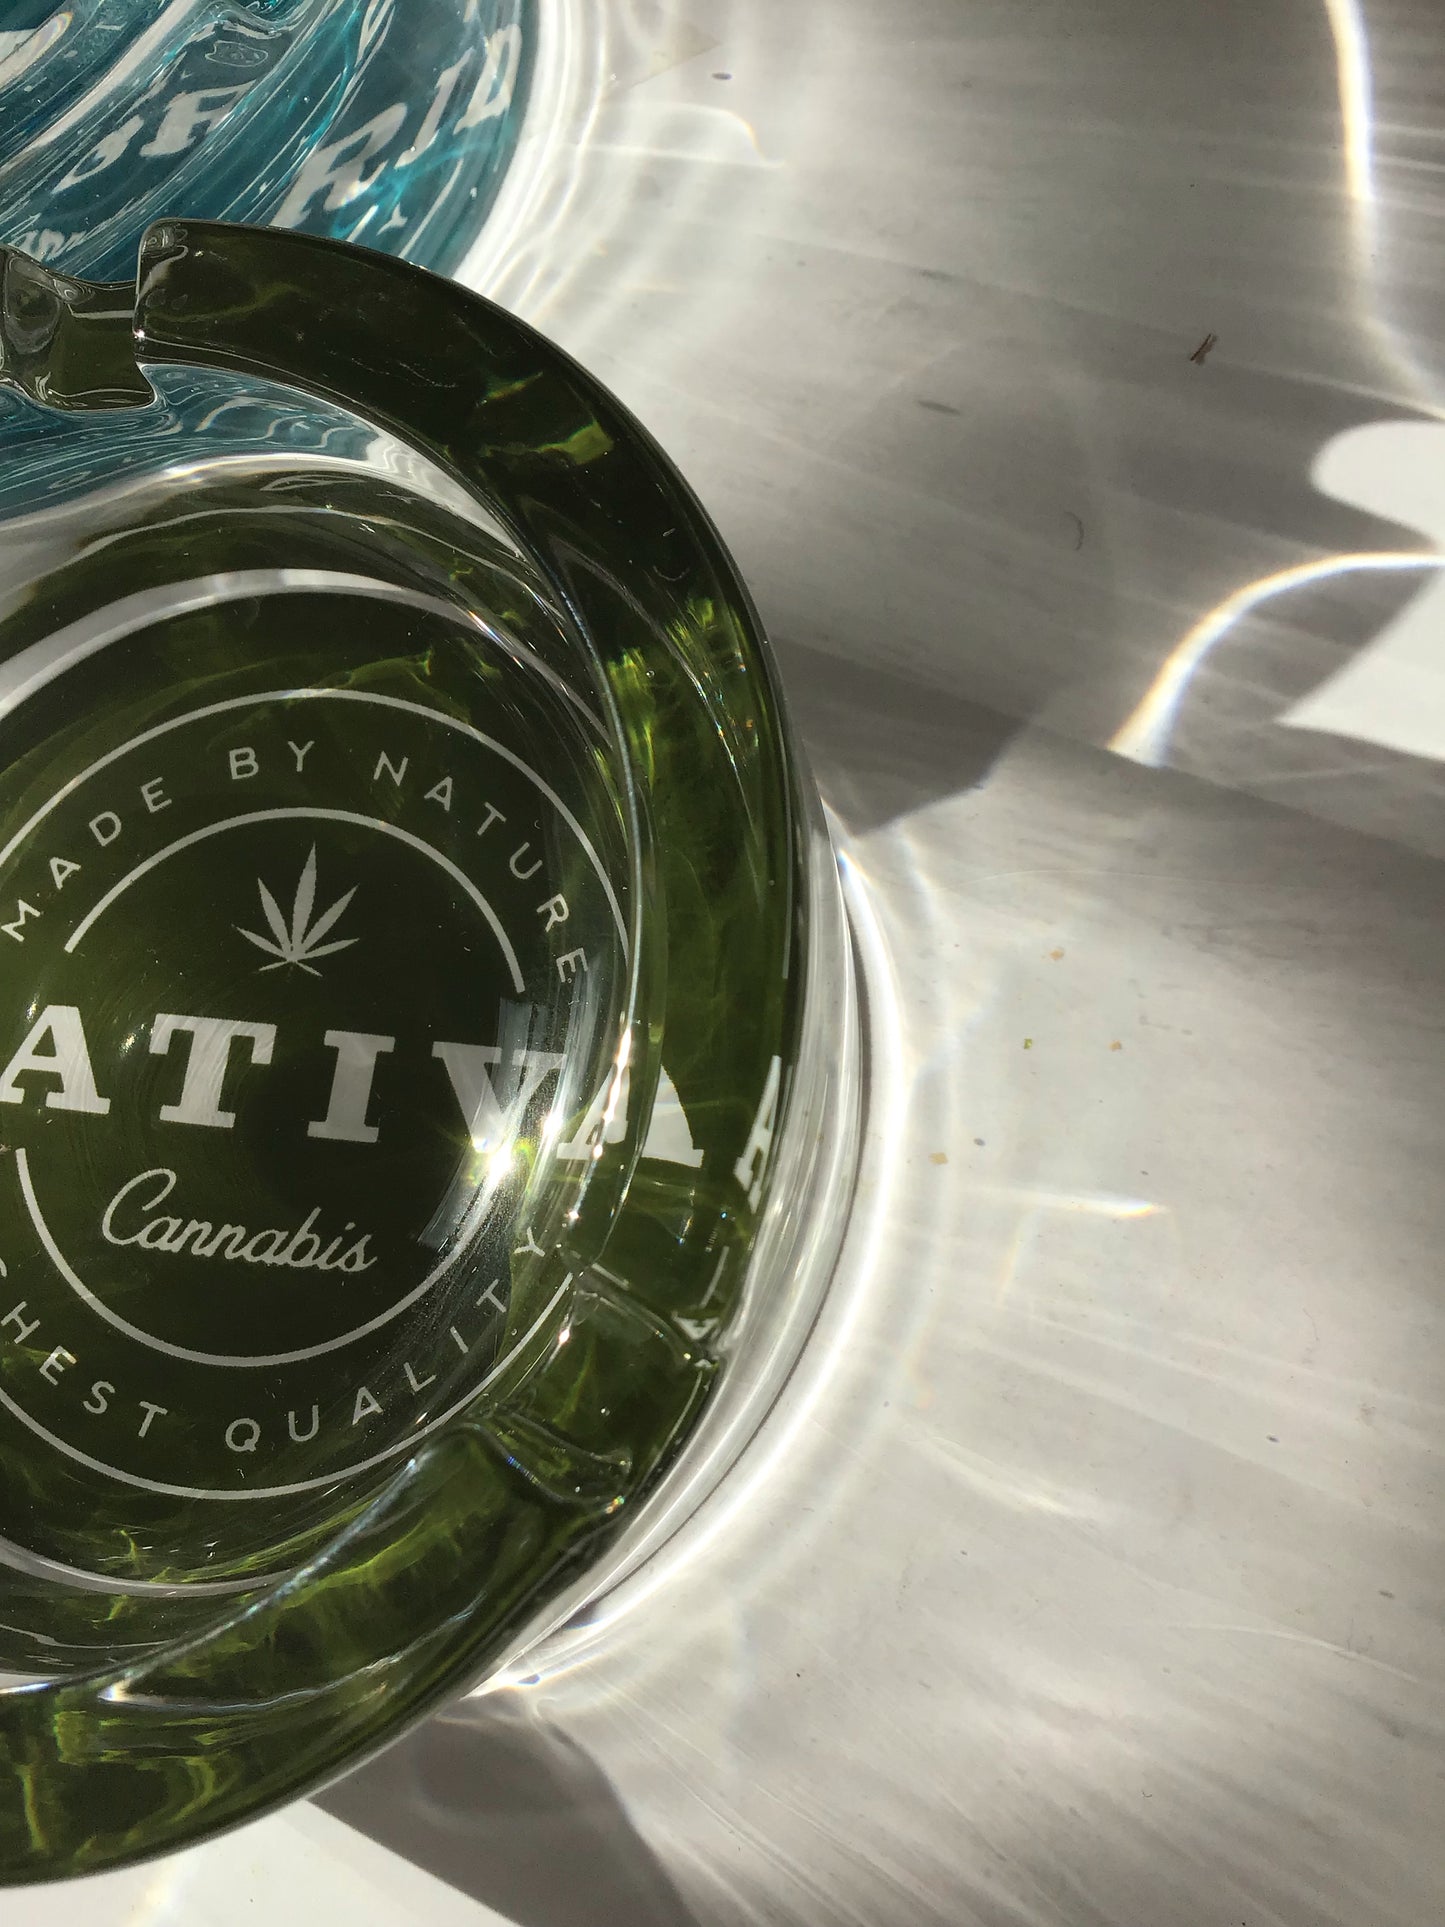 Sativa Highest Quality Design Durable Glass Ashtray yoga smokes yoga studio, delivery, delivery near me, yoga smokes smoke shop, find smoke shop, head shop near me, yoga studio, headshop, head shop, local smoke shop, psl, psl smoke shop, smoke shop, smokeshop, yoga, yoga studio, dispensary, local dispensary, smokeshop near me, port saint lucie, florida, port st lucie, lounge, life, highlife, love, stoned, highsociety. Yoga Smokes